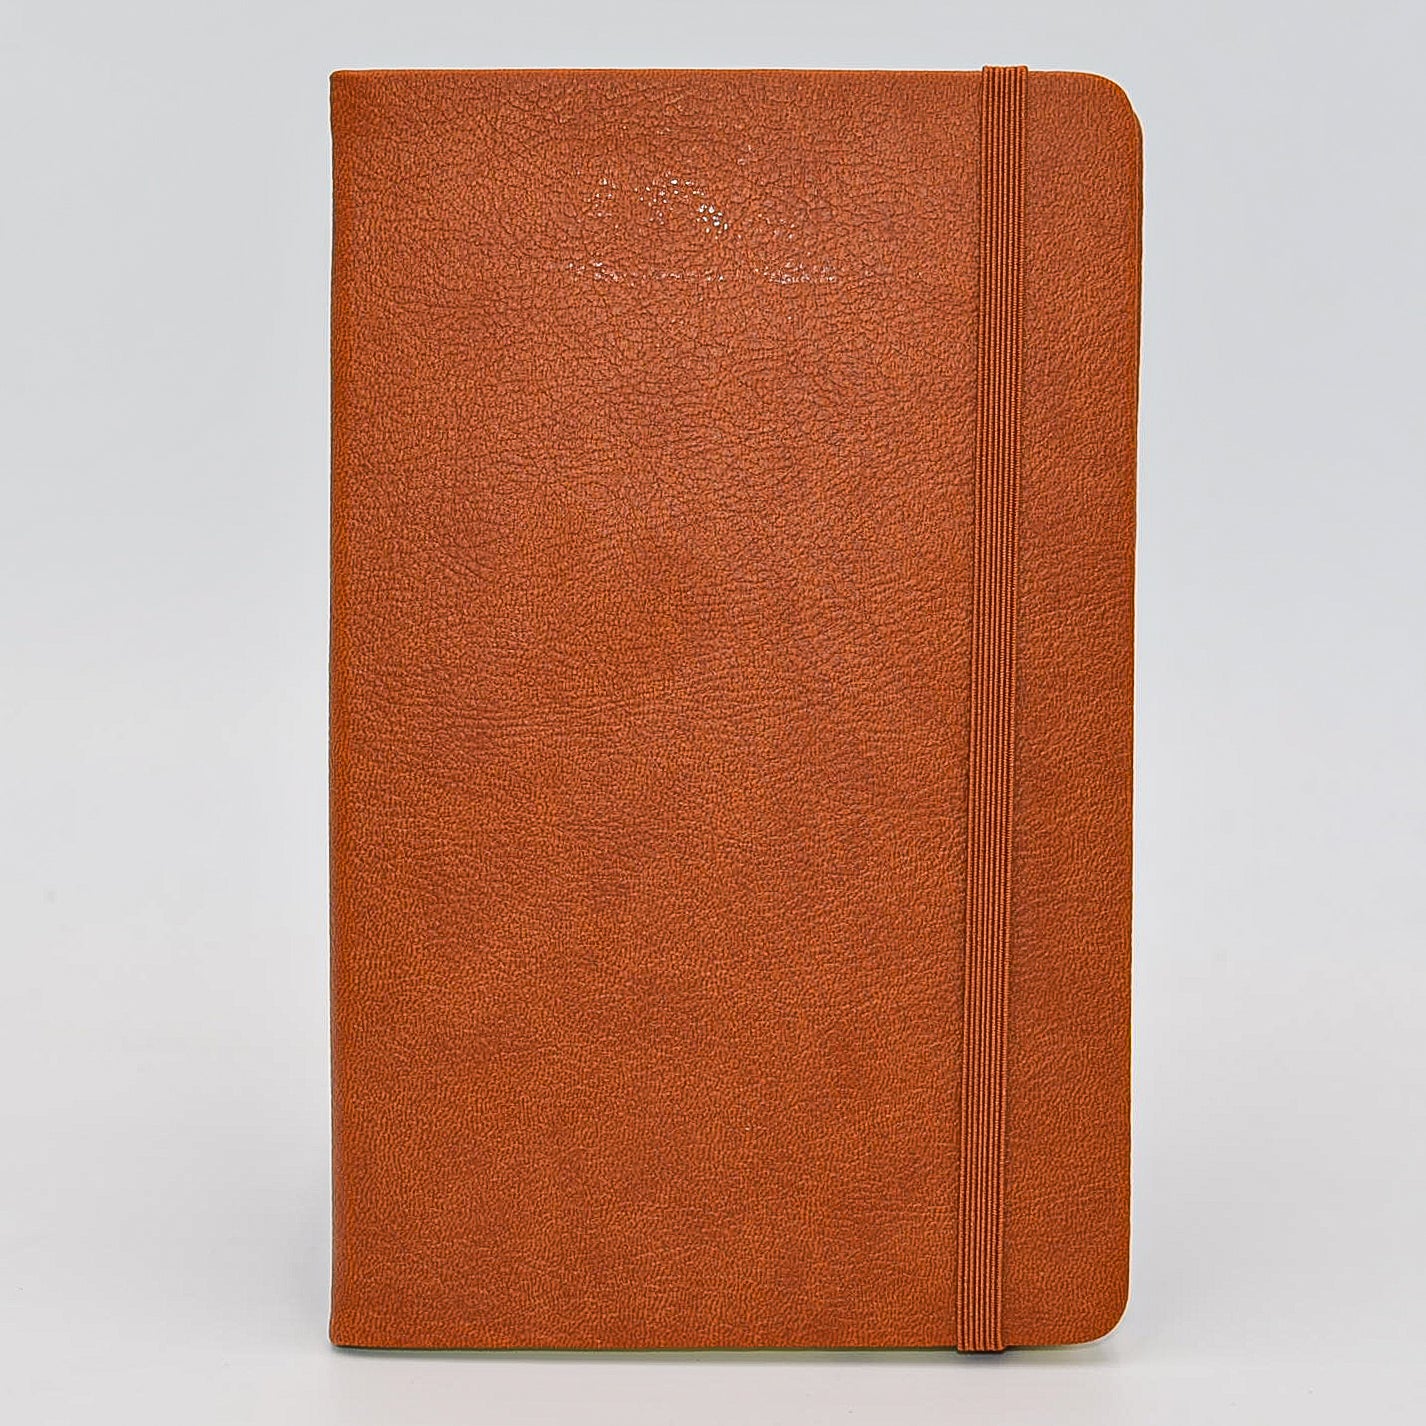 Journal: Faux Leather Lined Case Bound Book with Elastic Closure  This vegan leather ruled journal is perfect for your travels, home, car, or office. With a convenient elastic band closure, keep your book closed with ease. With ivory ruled pages, keep easy notes throughout your day.  Available in Tan, White, and Blue  Dimensions: 5" x 8" tan british tan brown light brown 